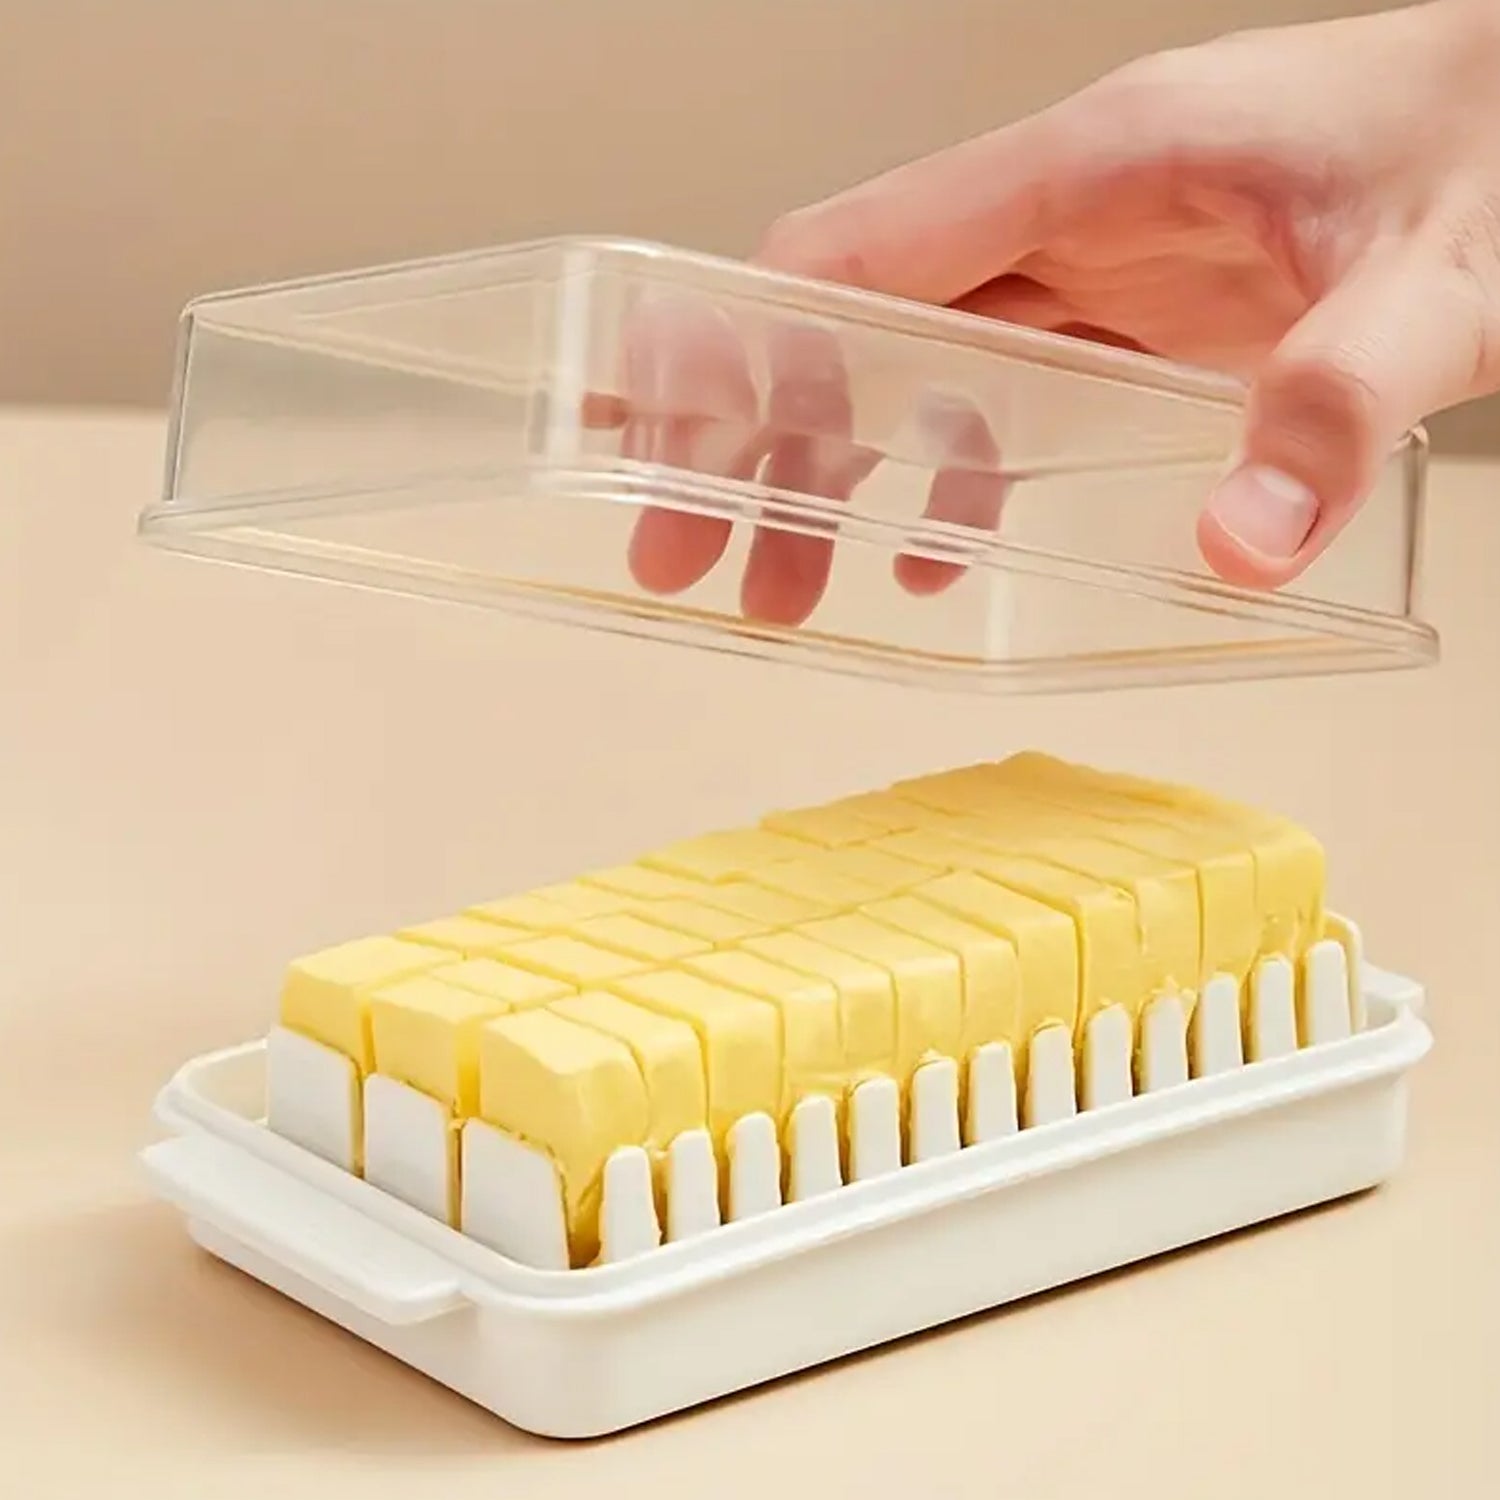 5848 Butter storage box with slicer for easy cutting,cheese butter organizer dispenser for kitchen refrigerator,Transparent plastic butter box with lid,butter cutter slicer storage tray (1 Pc)